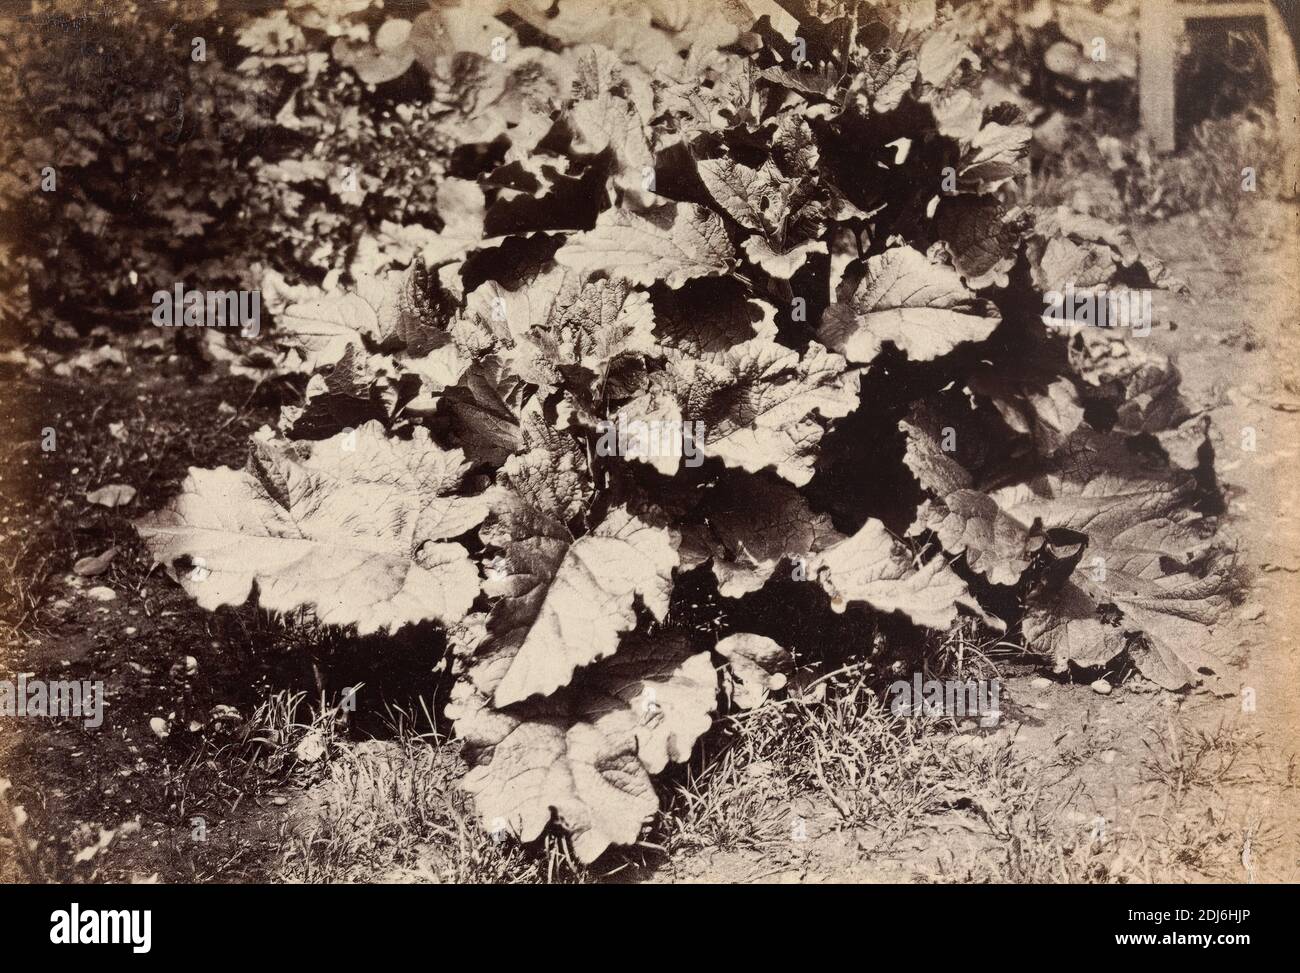 Plant Study, Robert Burrows, 1810–1883, British, 1860s, Albumen print from wet collodion negative on thin, smooth, cream wove paper, Sheet: 4 1/4 × 6 1/8 inches (10.8 × 15.6 cm) and Mount: 7 × 8 7/8 inches (17.8 × 22.5 cm), botanical subject, leaves, plant Stock Photo